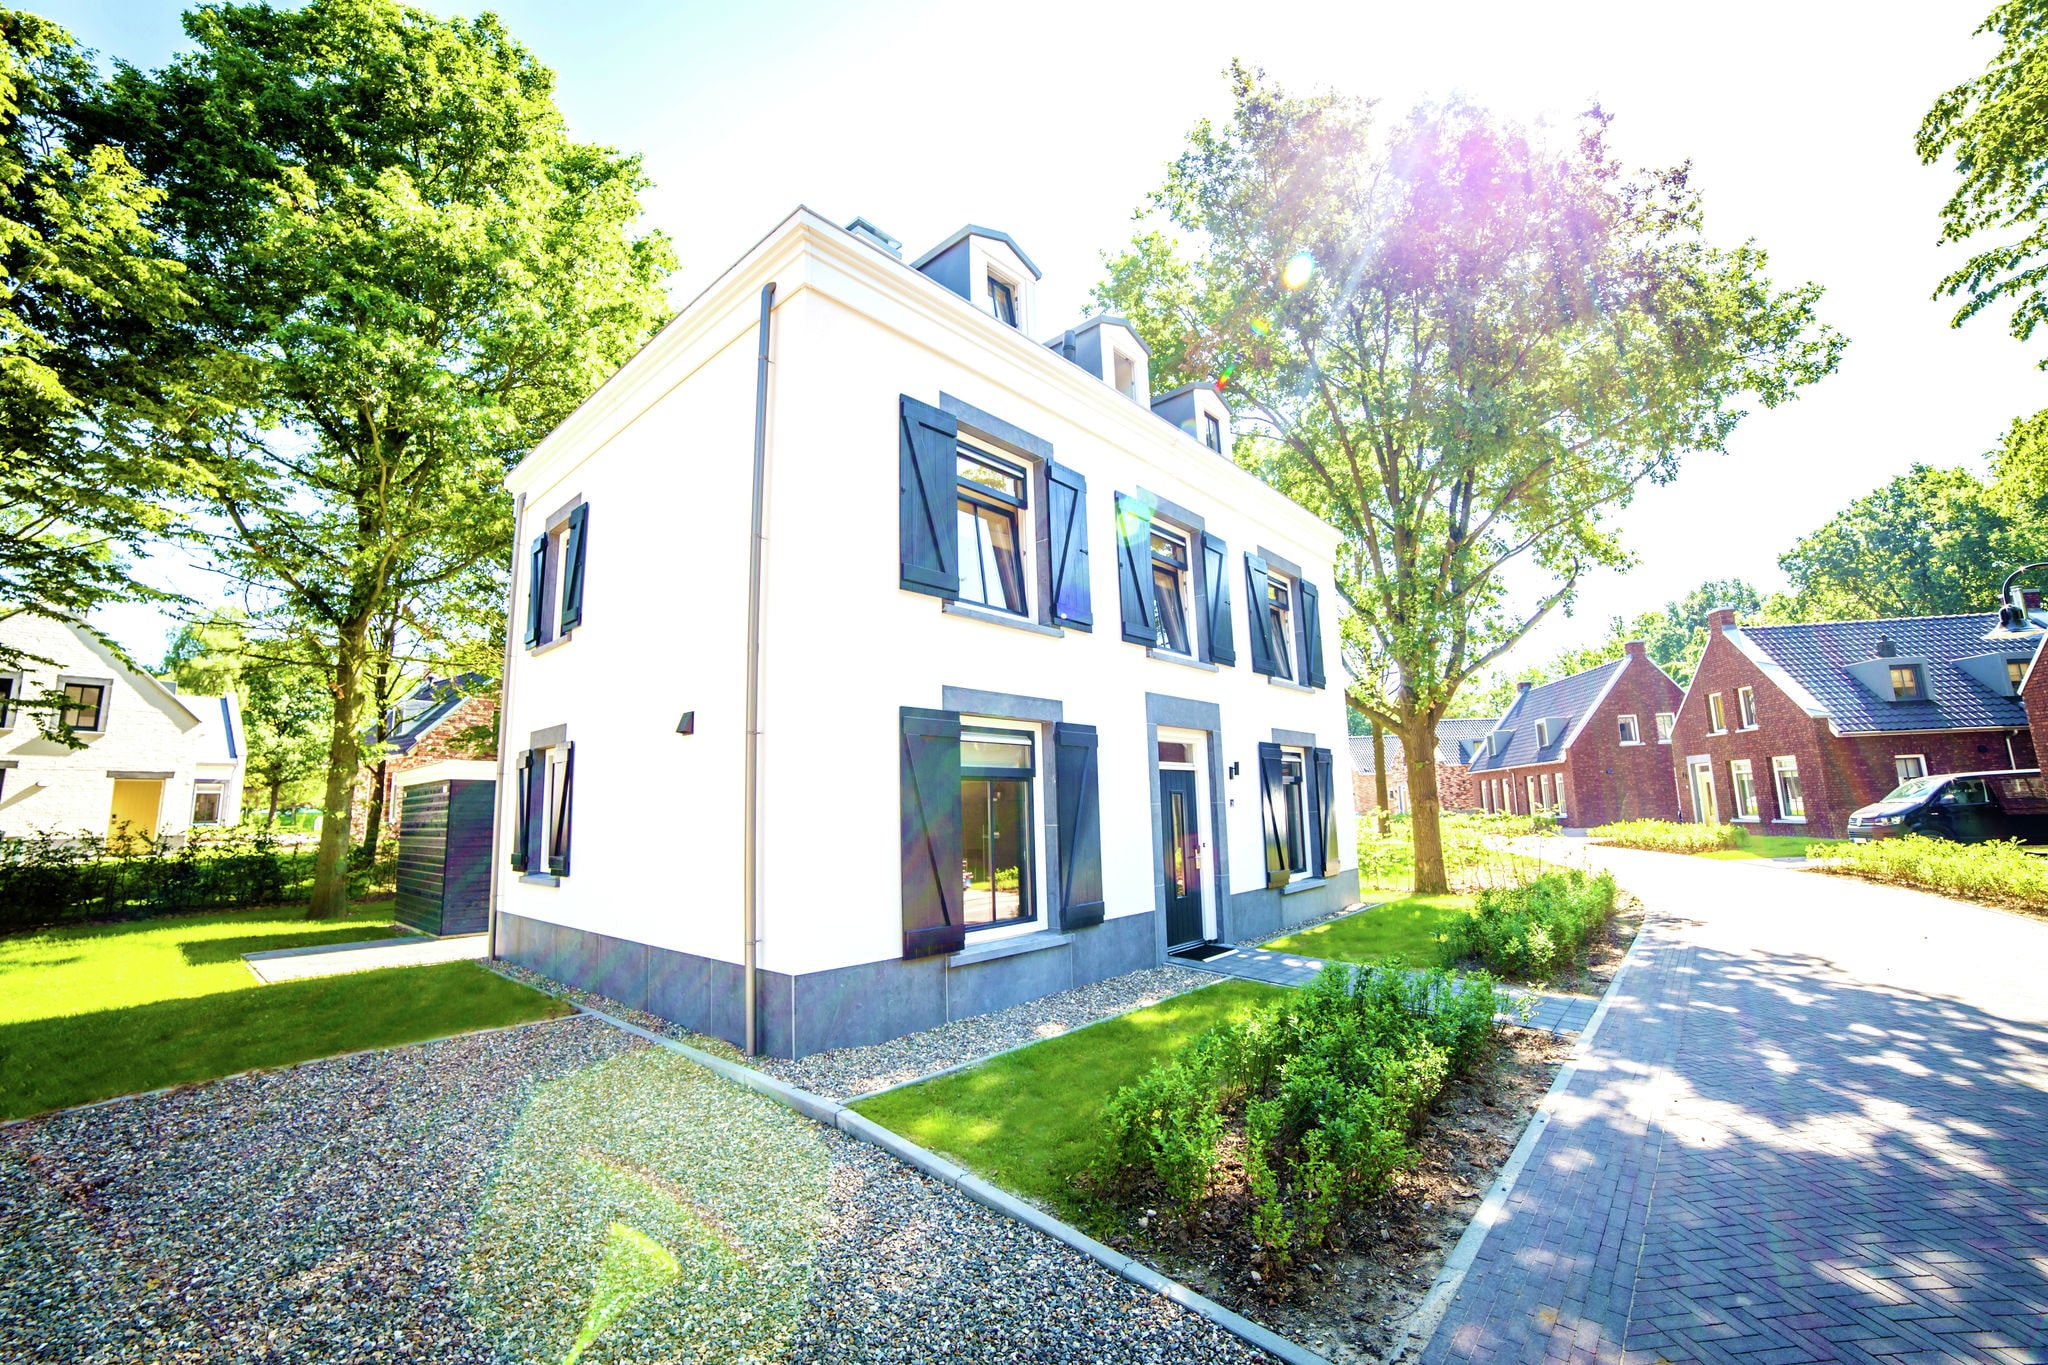 Villa with bubble bath, 4km from Maastricht